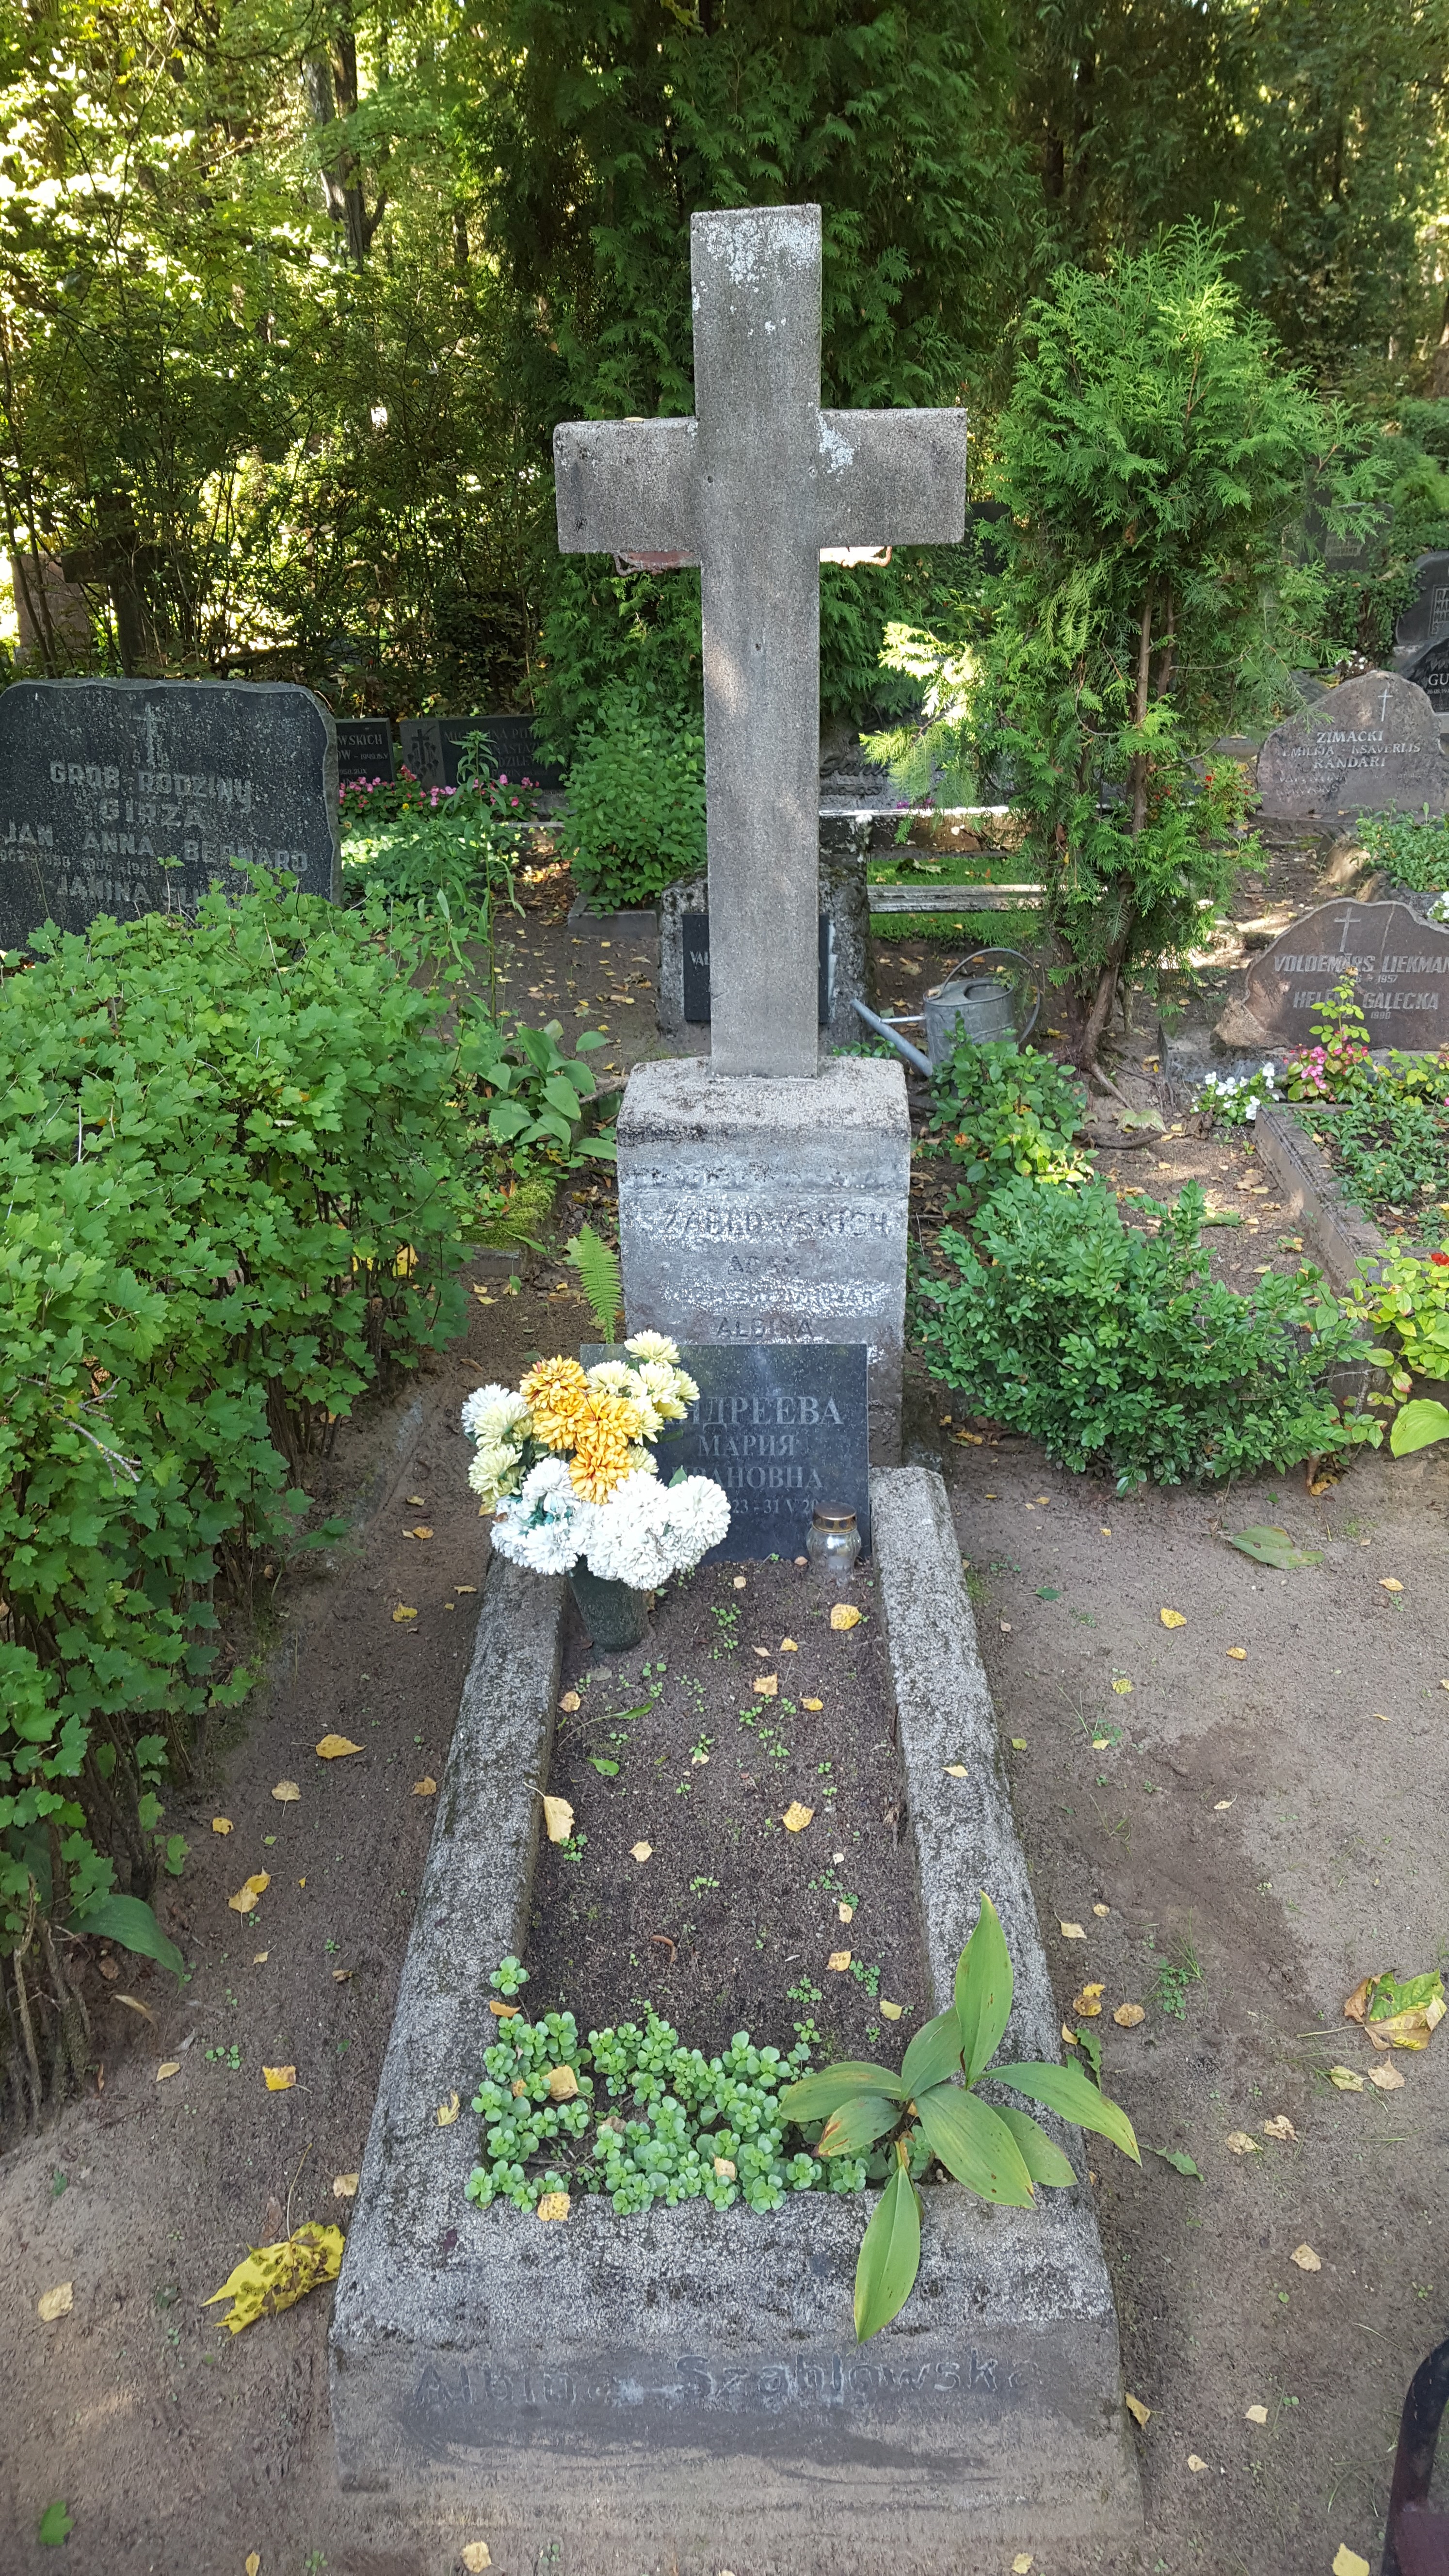 Tombstone of Adam Szablowski and Albina Szablowska, St Michael's cemetery in Riga, as of 2021.